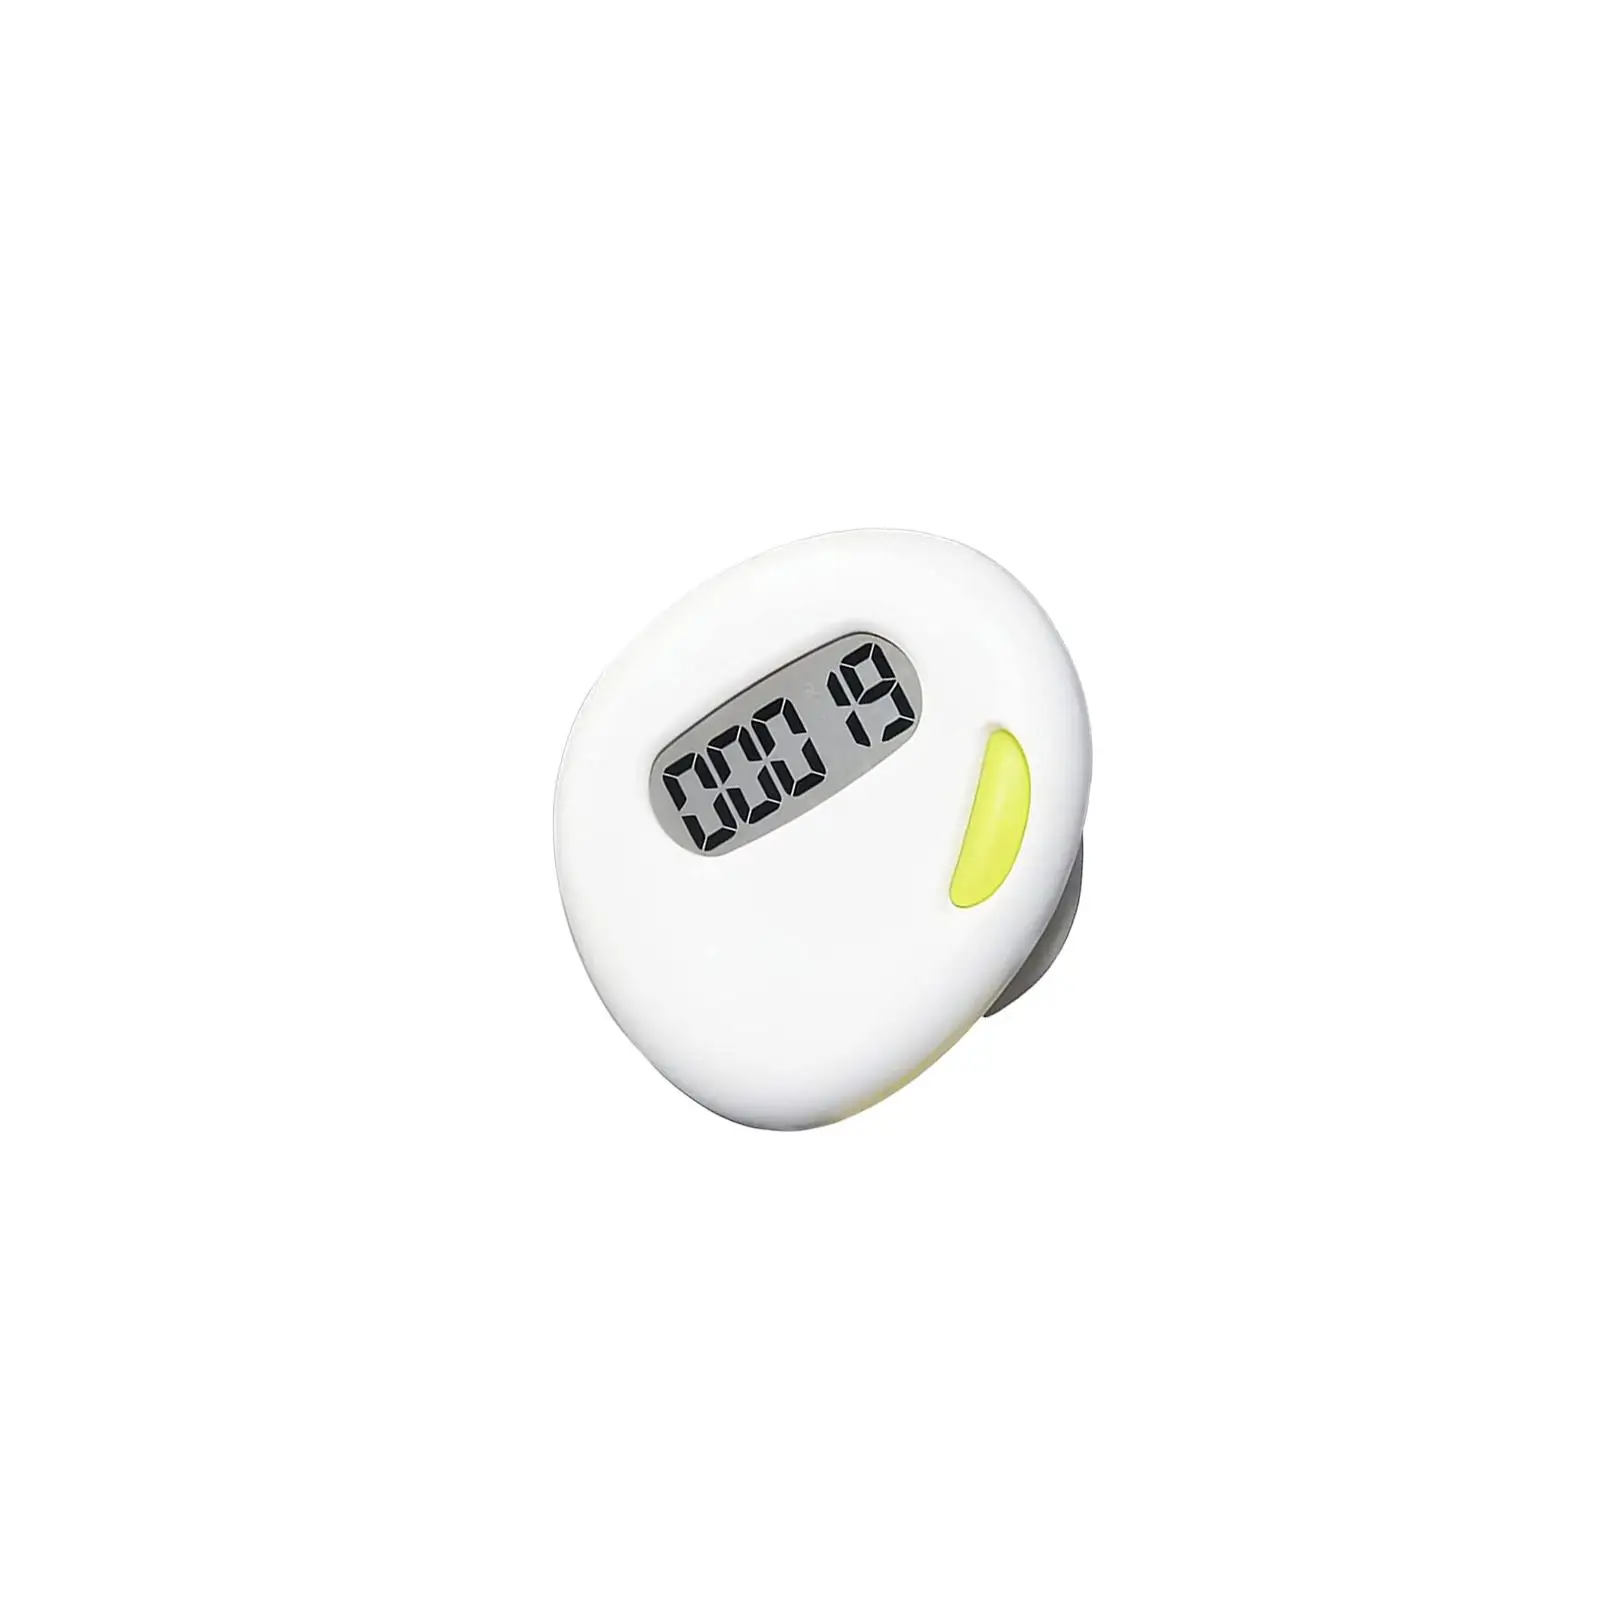 Portable Electronic Pedometer Exercise Daily Target Monitor 2D Digital Pedometer for Running Hiking Walking Fitness Accessories